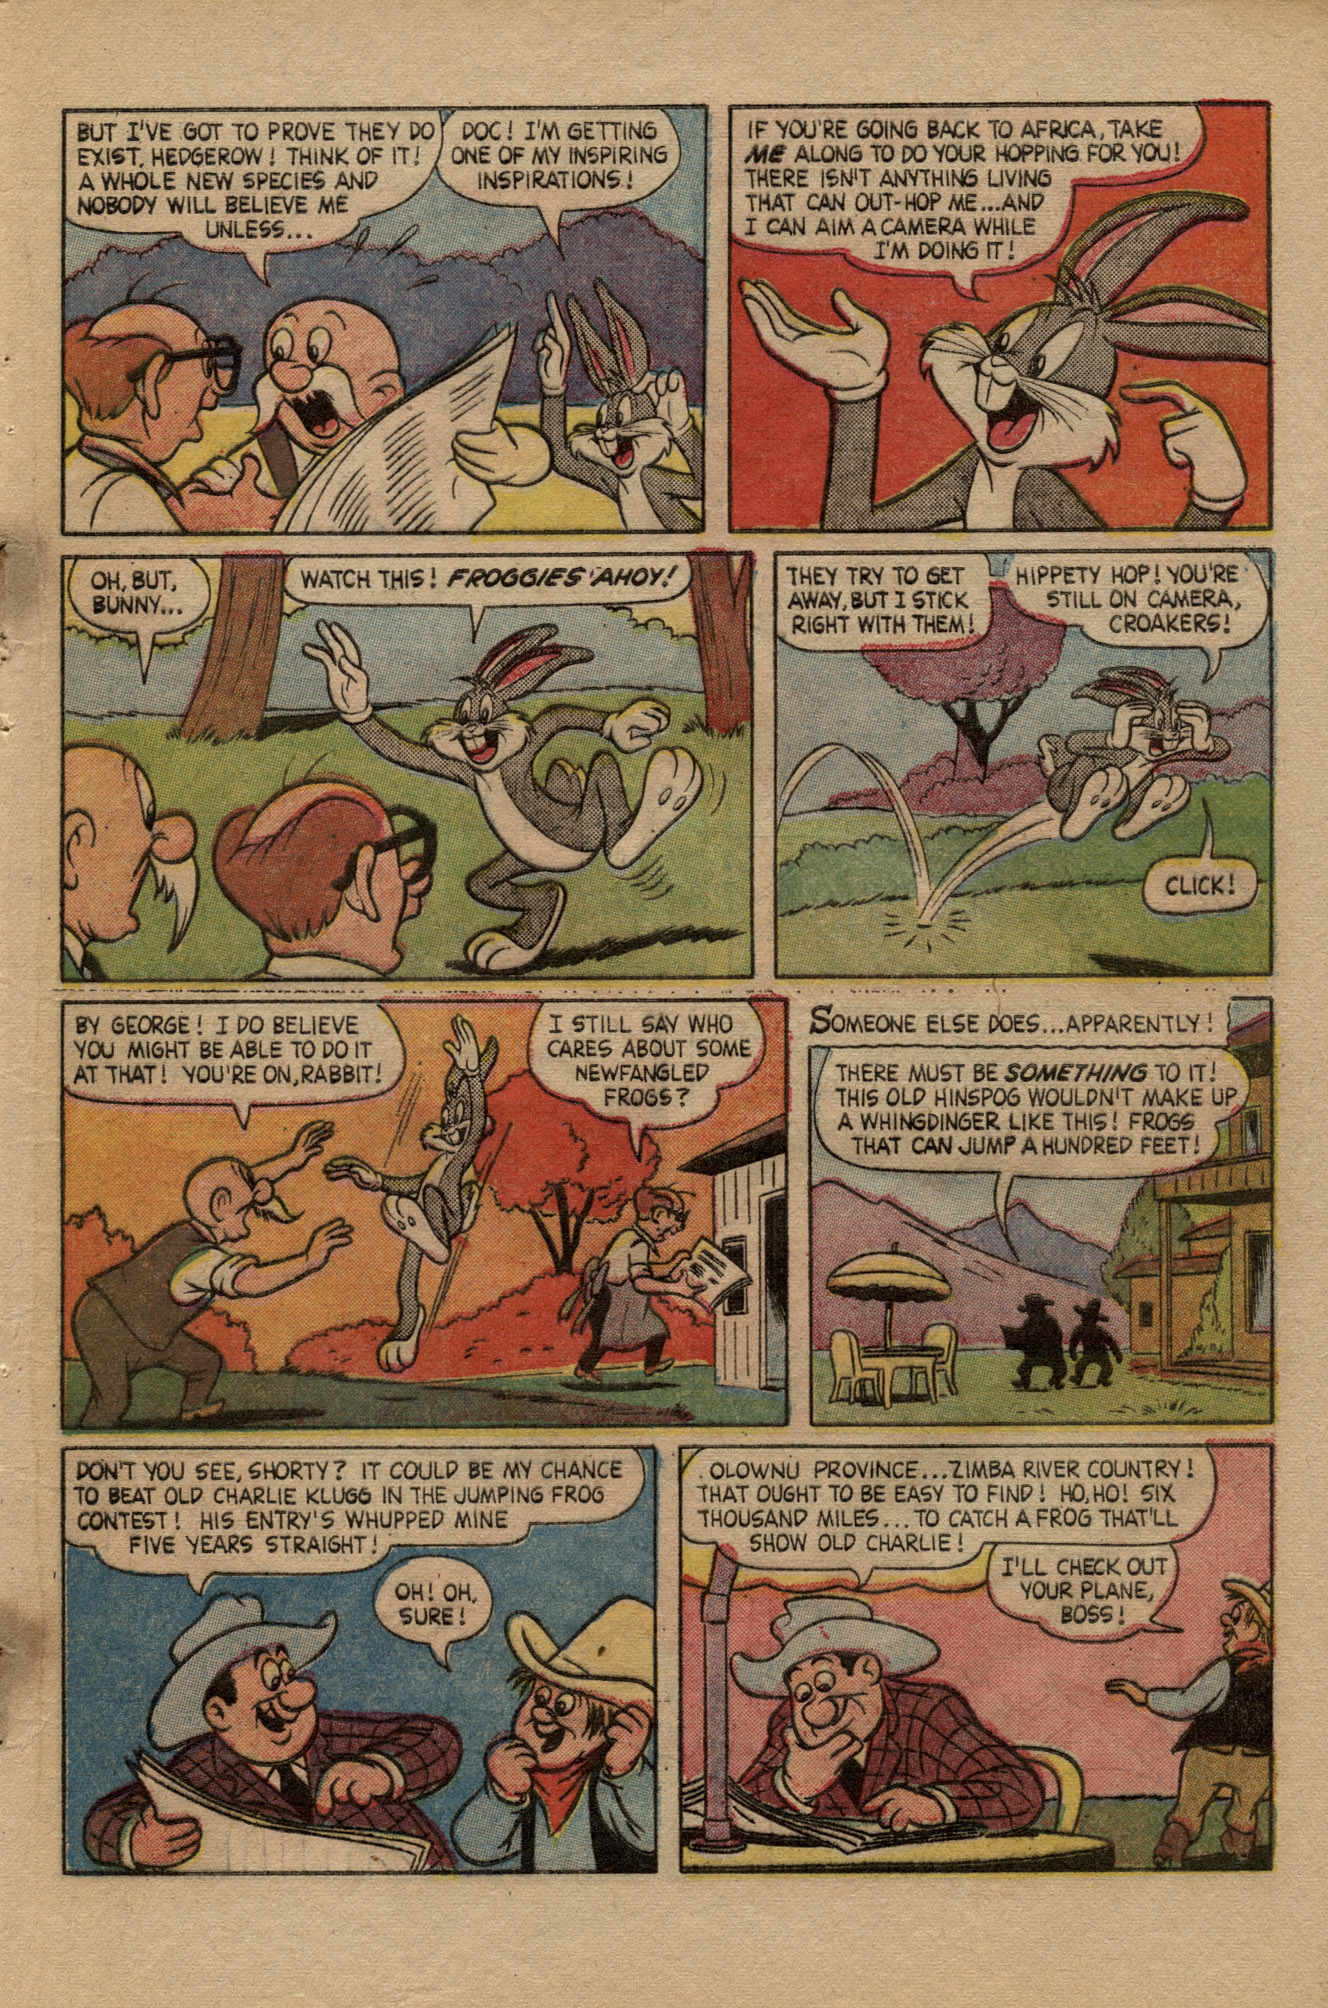 Read online Bugs Bunny comic -  Issue #131 - 5